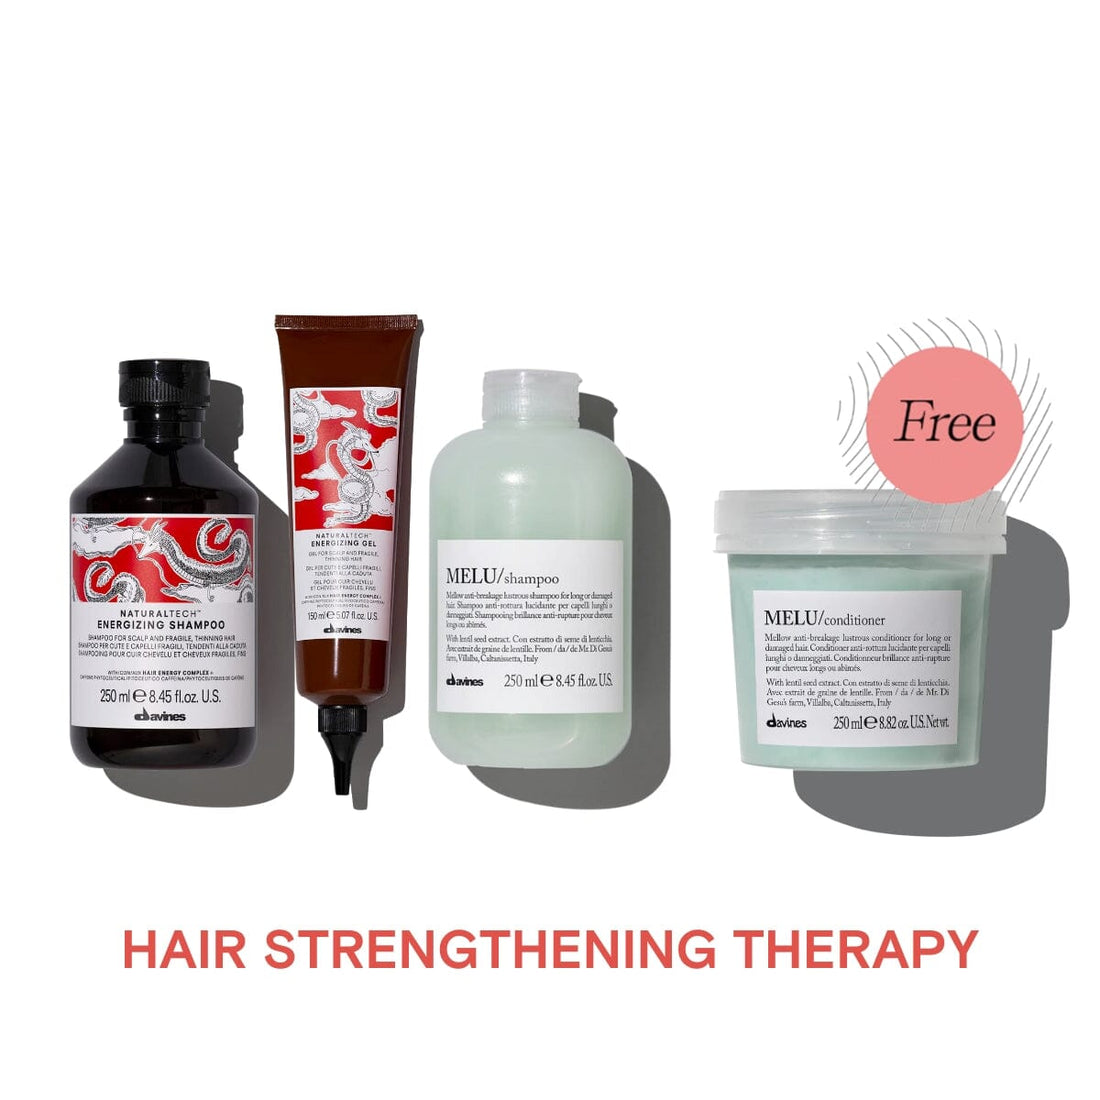 Davines Energizing and MELU Hair Strengthening Therapy Set w/ FREE MELU Conditioner 250ml - HairMNL